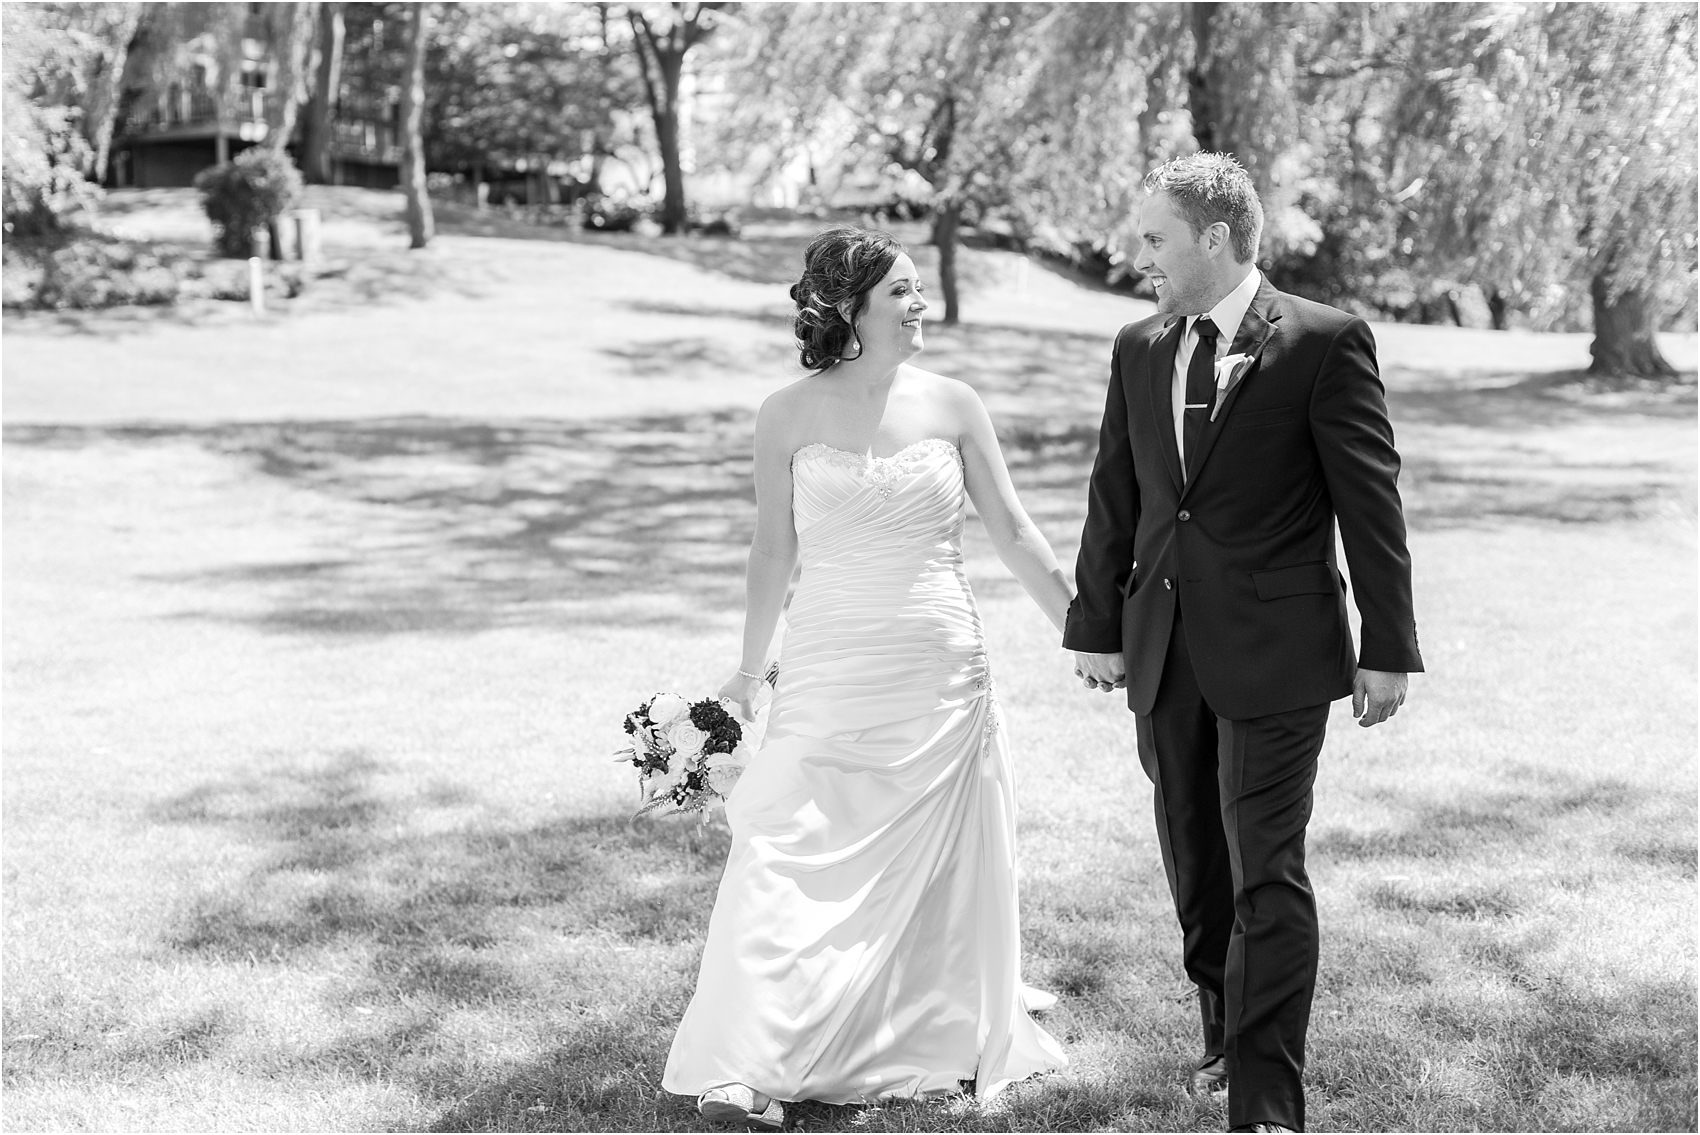 classic-wedding-photos-at-great-oaks-country-club-in-rochester-hills-mi-by-courtney-carolyn-photography_0031.jpg